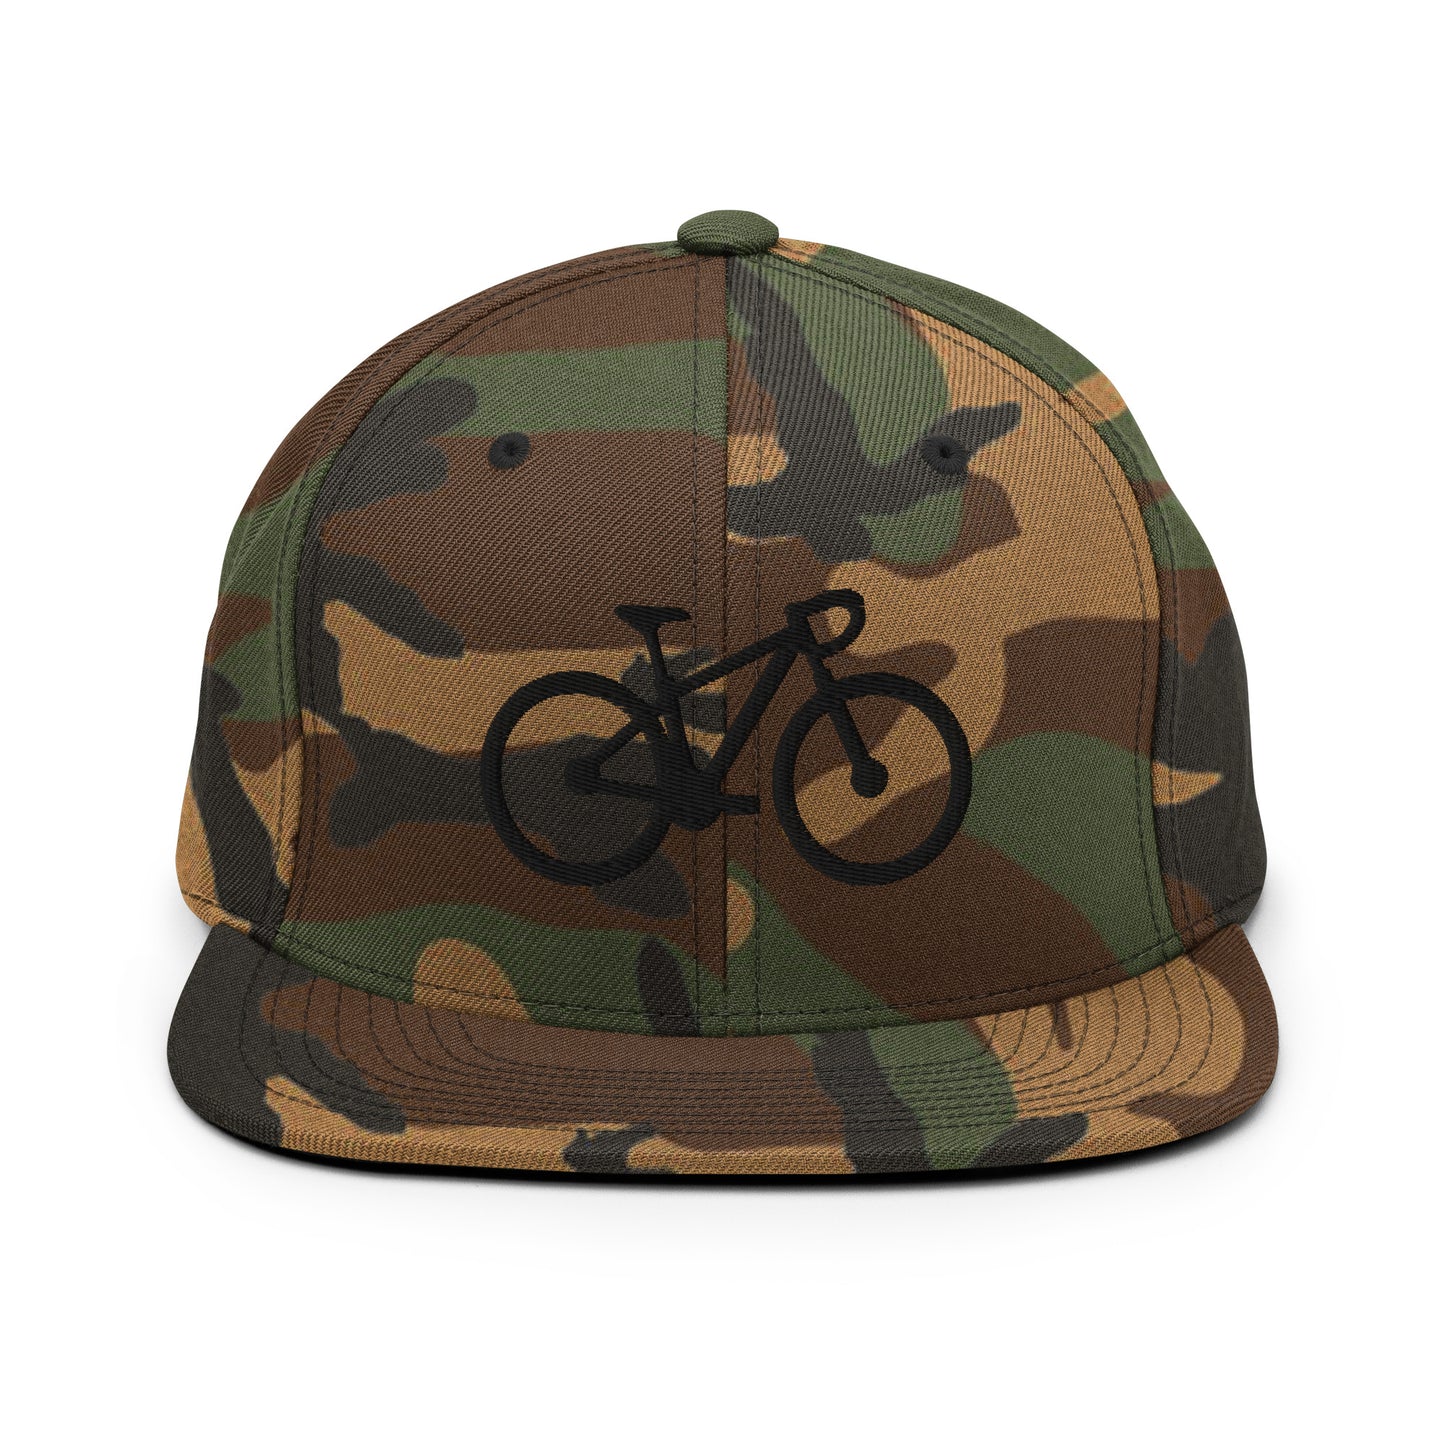 Race Bike 3D Puff Embroidered Snapback Hat